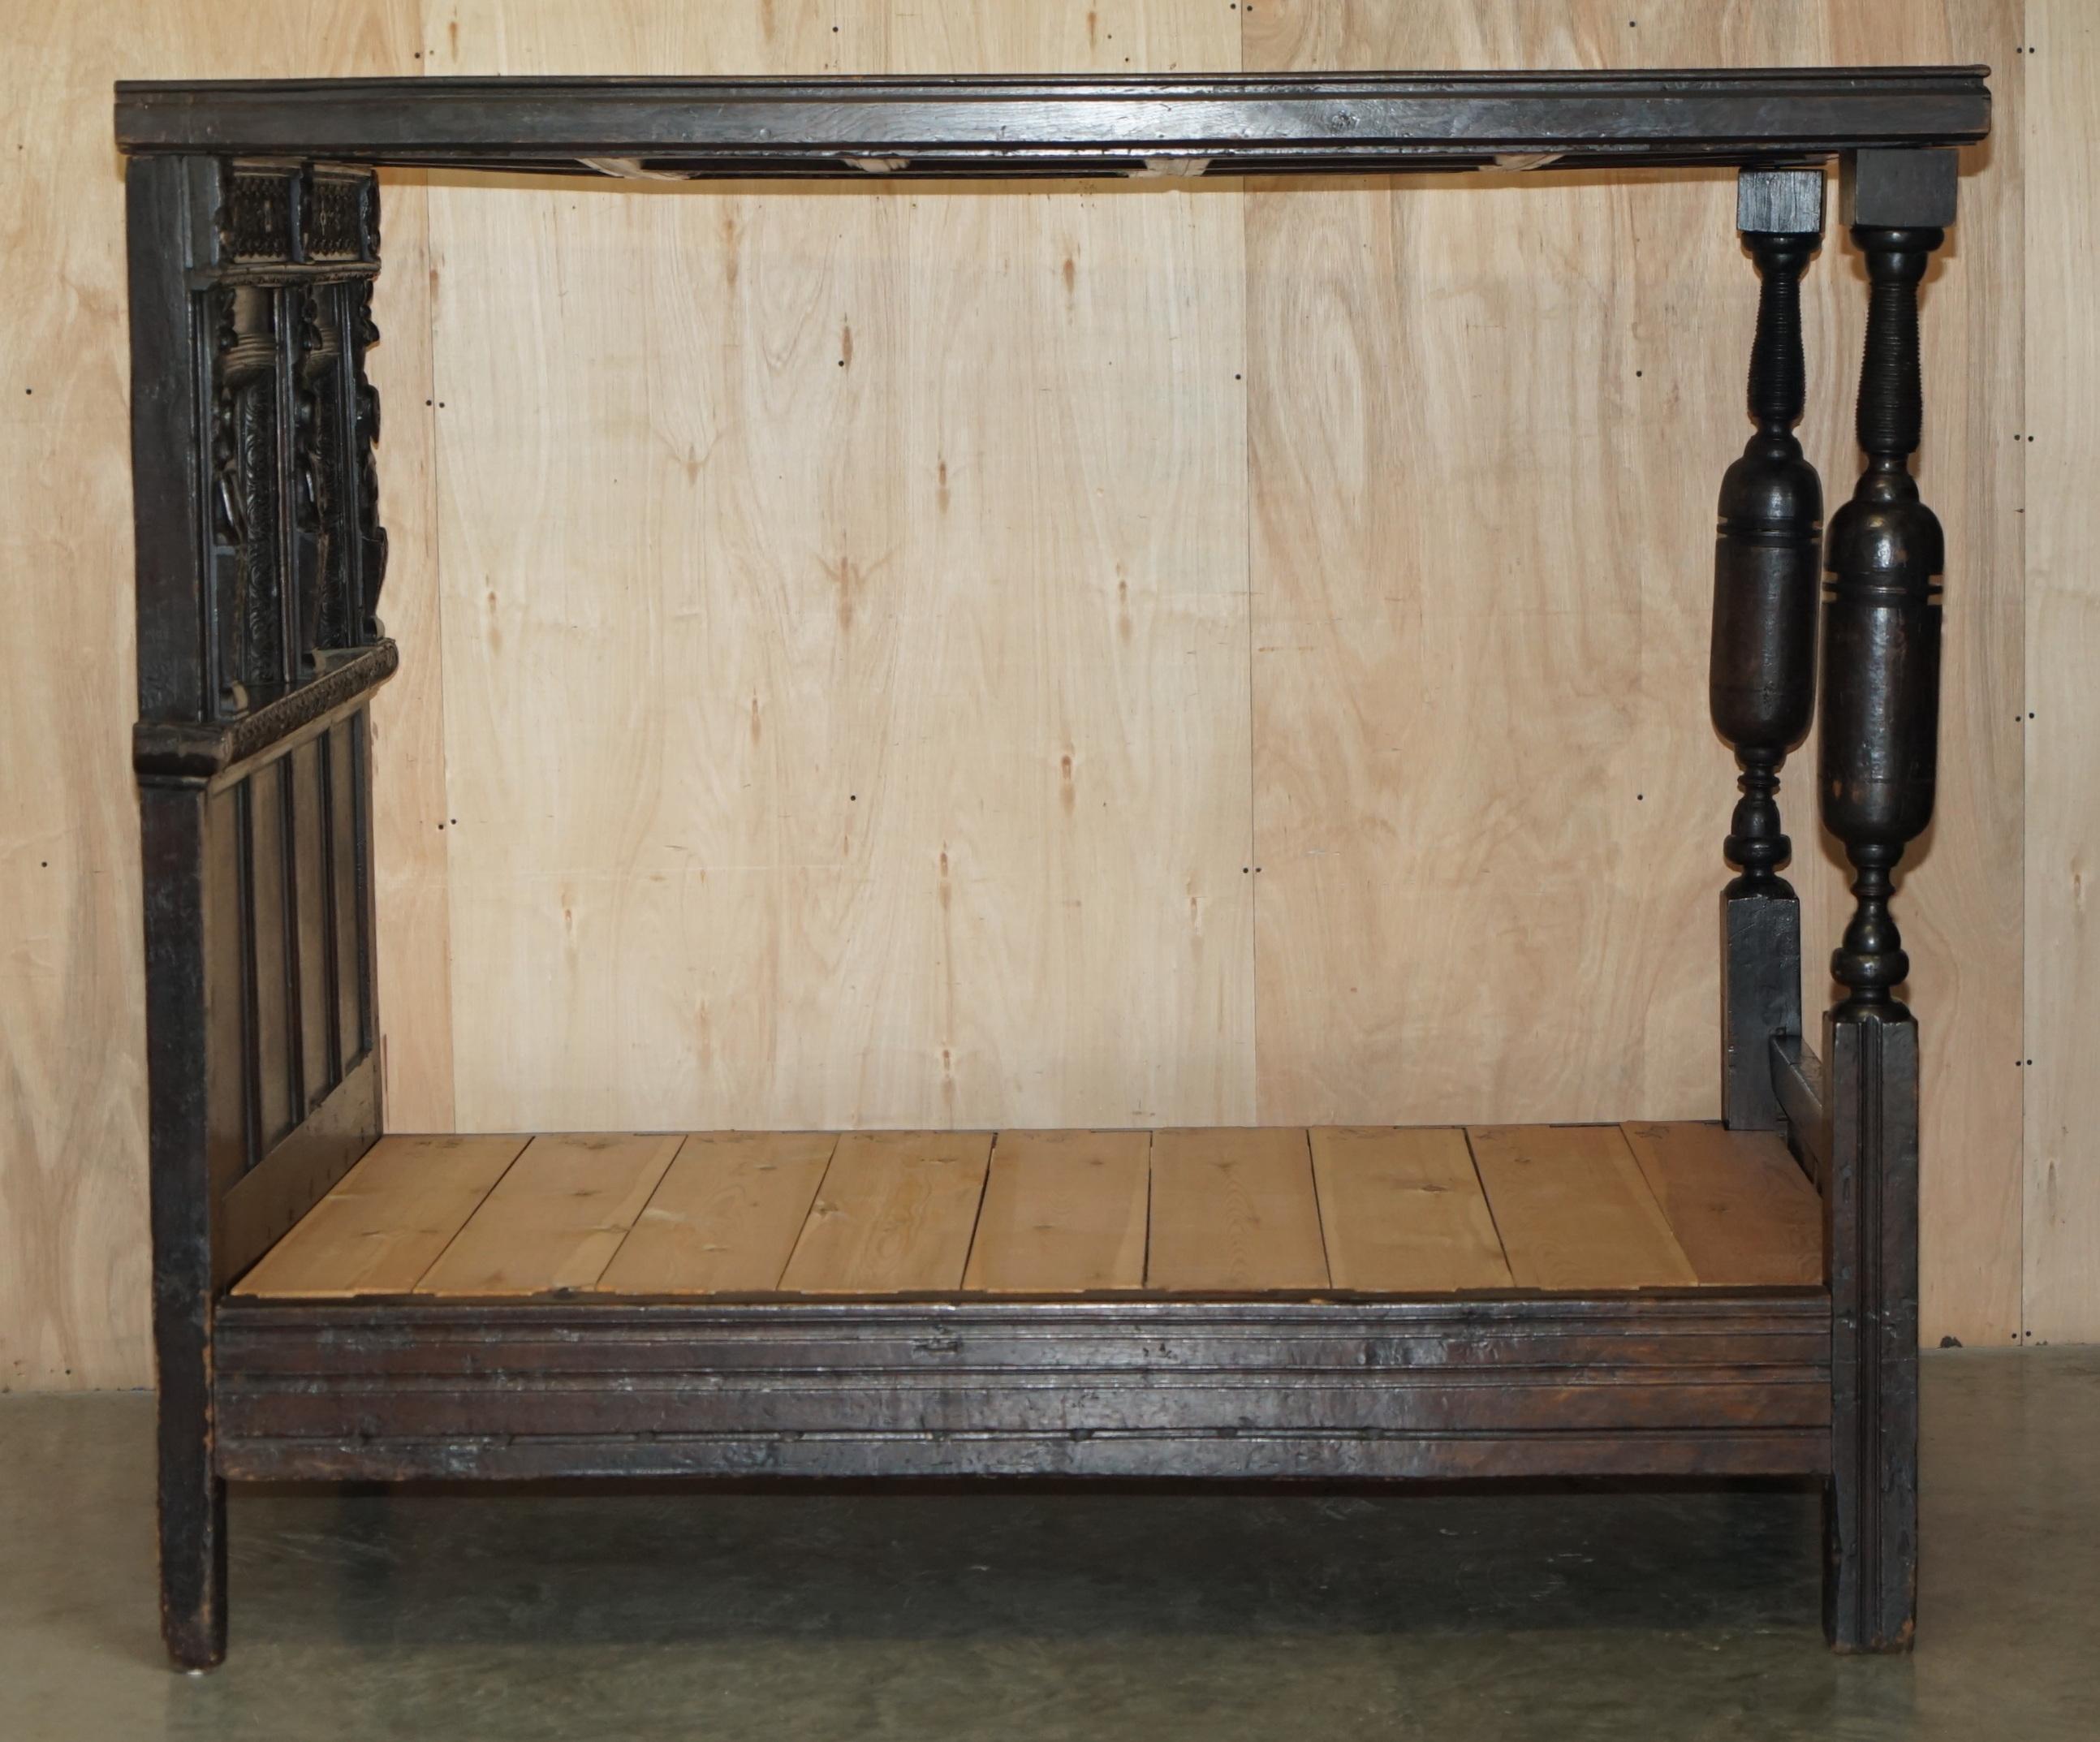 17TH CENTURY JACOBEAN WILLIAM III CIRCA 1650 ENGLiSH OAK TESTER FOUR POSTER BED For Sale 8